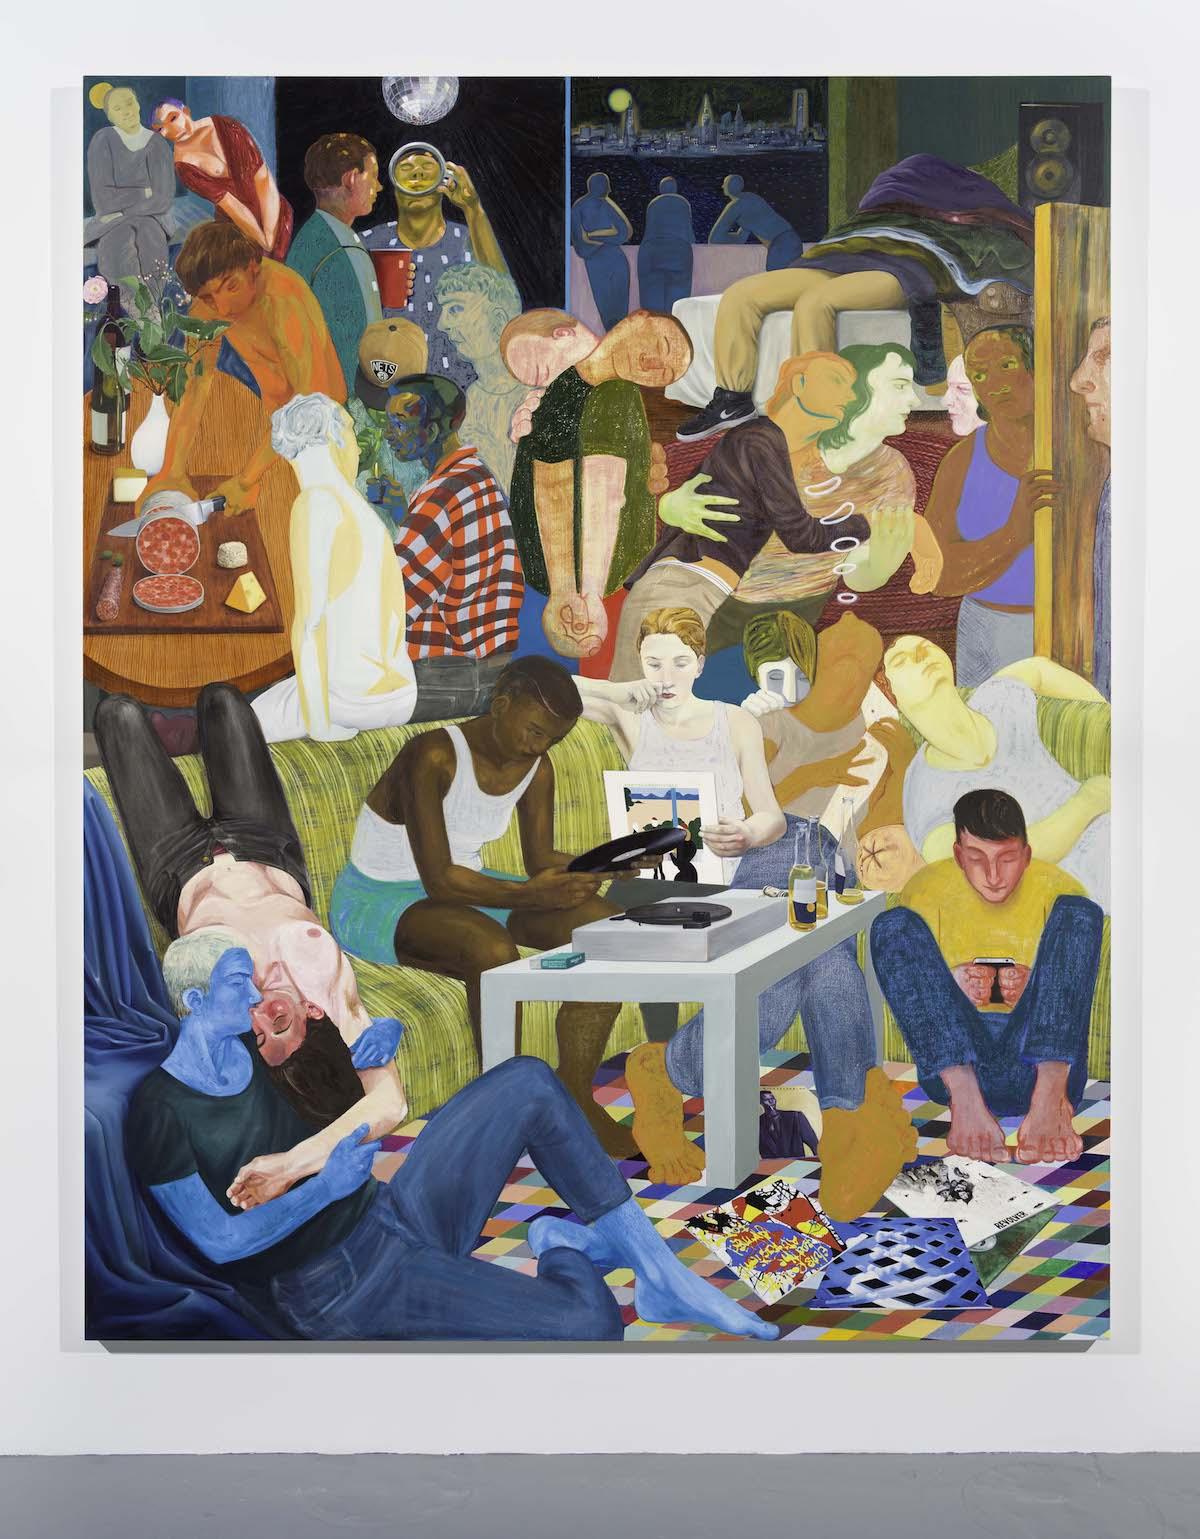 Nicole Eisenman (b. 1965, Verdun, France; lives in Brooklyn, NY), Another Green World, 2015. Oil on canvas; 128 × 106 in. (325.12 × 269.24 cm). The Museum of Contemporary Art, Los Angeles, Purchase with funds provided by the Acquisition and Collection Committee. 